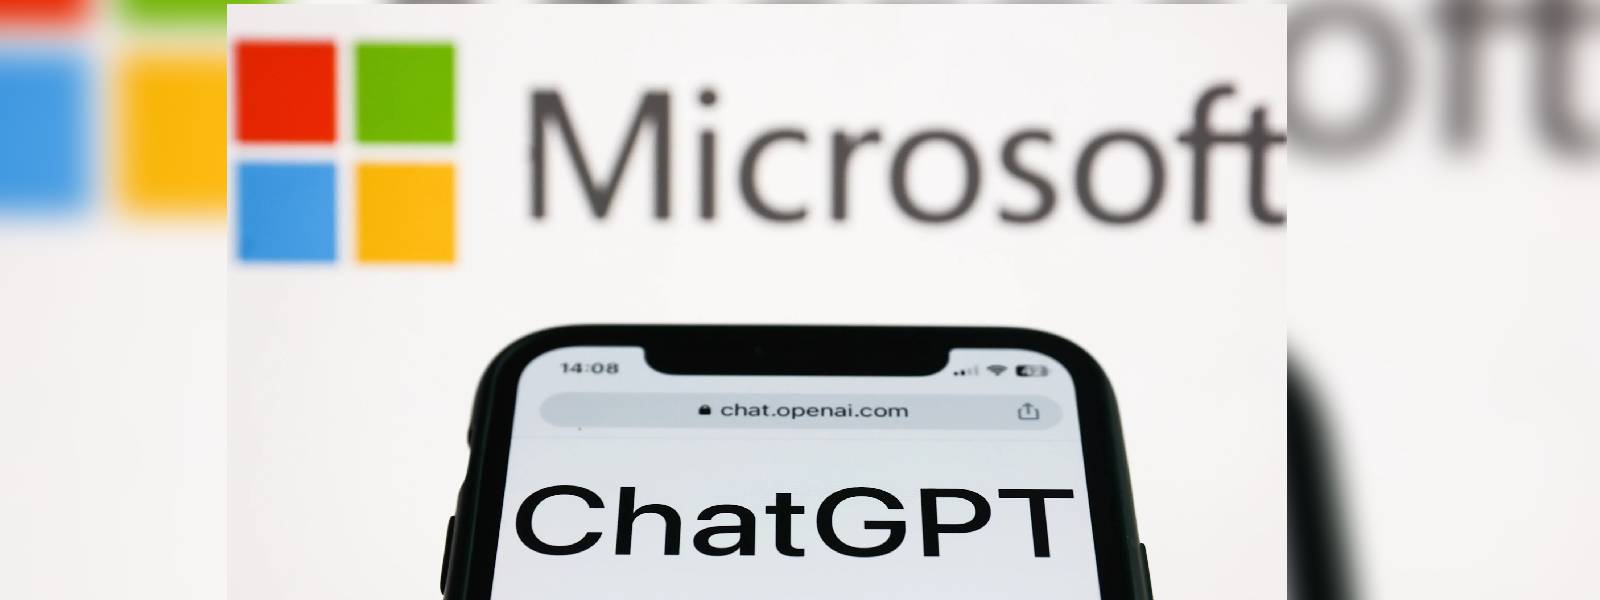 Microsoft to invest billions in CHATgpt's maker